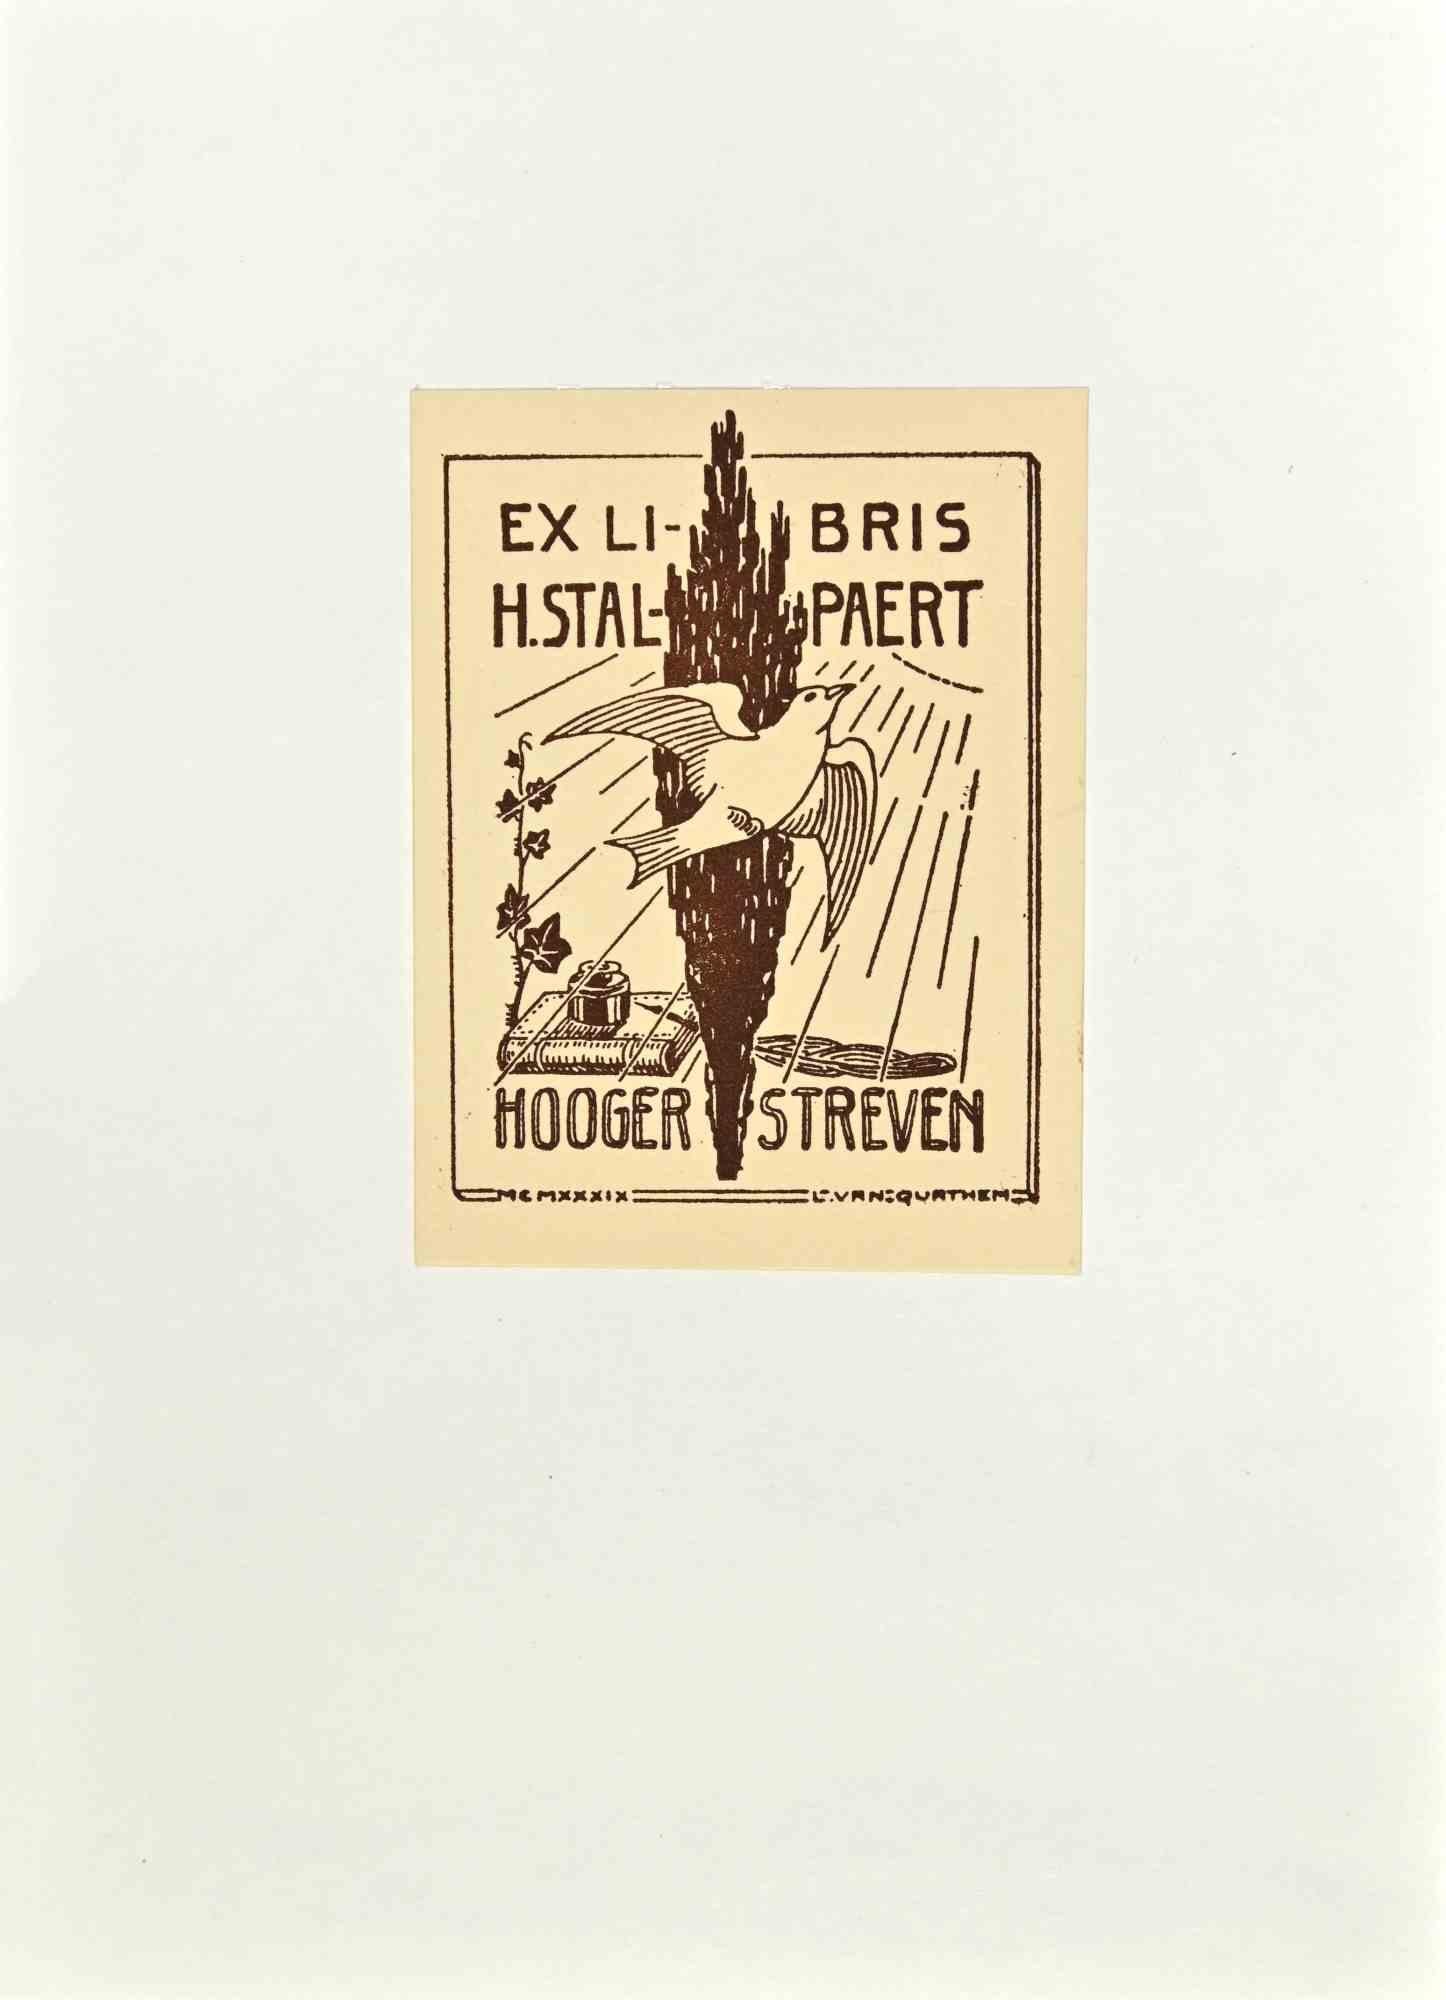 Ex-Libris H. Stalpaert is an Artwork realized in 1939, by Hervé Stalpaert

Woodcut B./W. print on ivory paper. The work is glued on cardboard. 

Total dimensions: 21 x 15 cm.

Good conditions.

 The artwork represents a minimalistic, clean design,